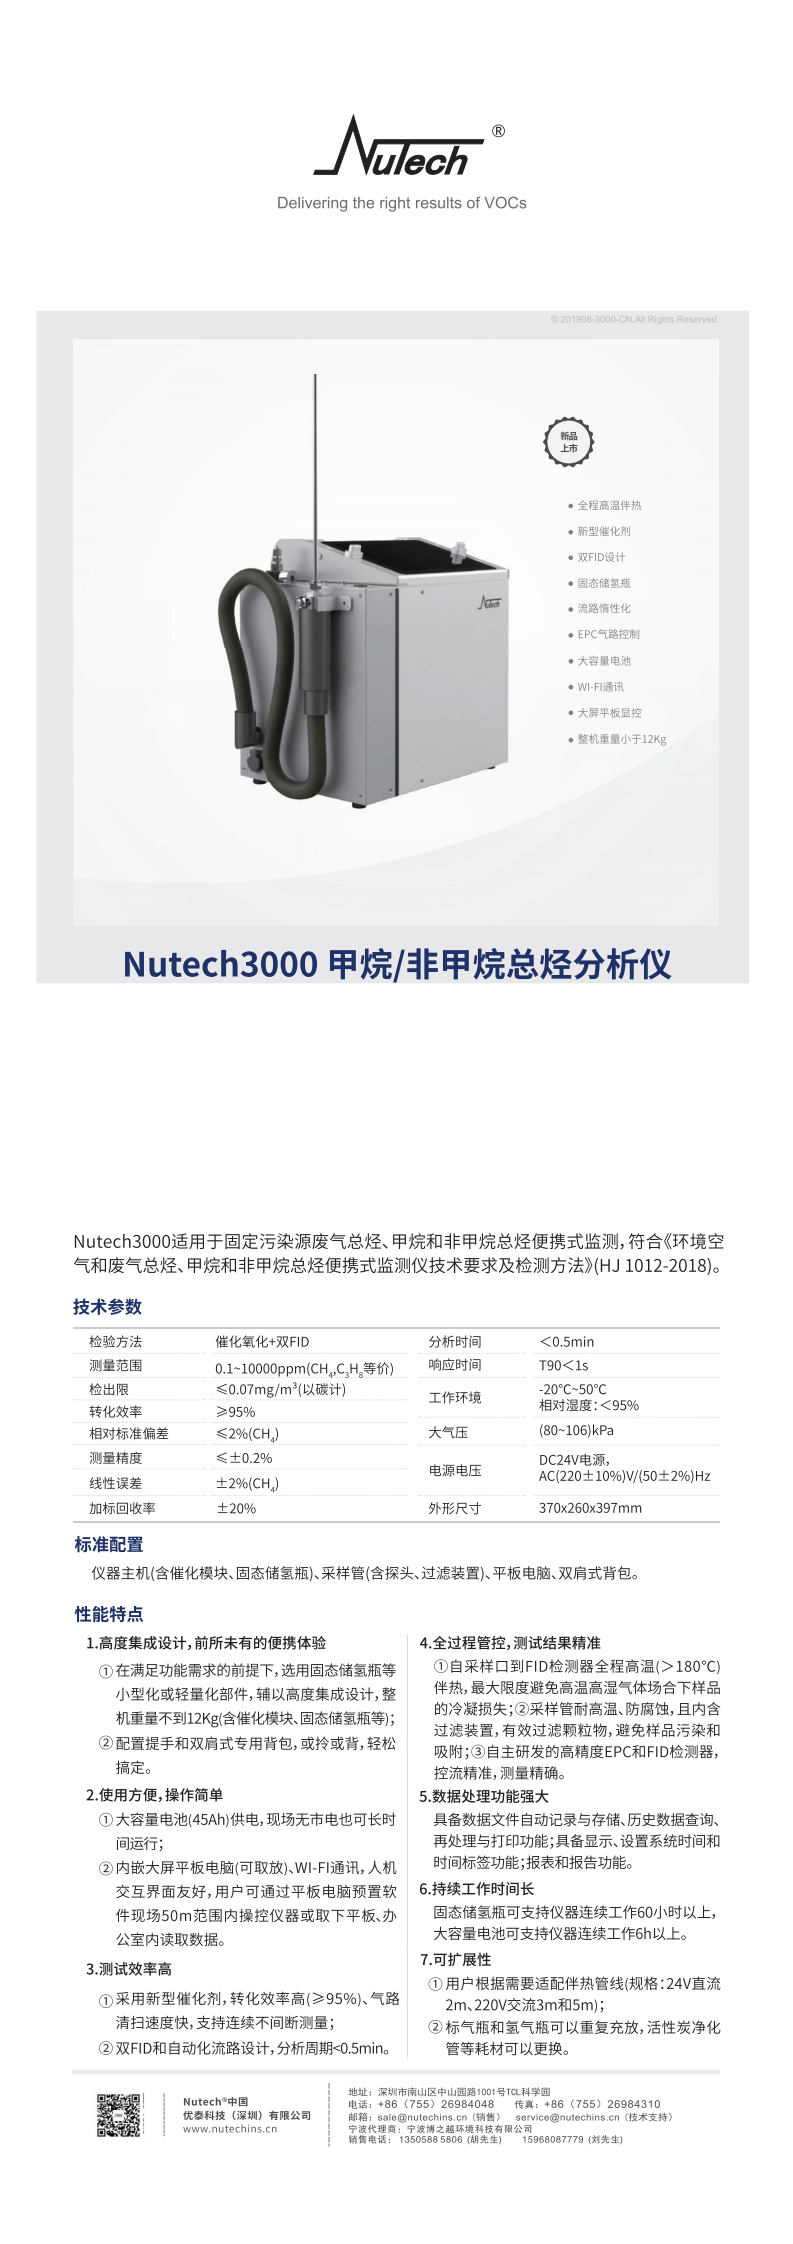 nutech3000彩页_0.png